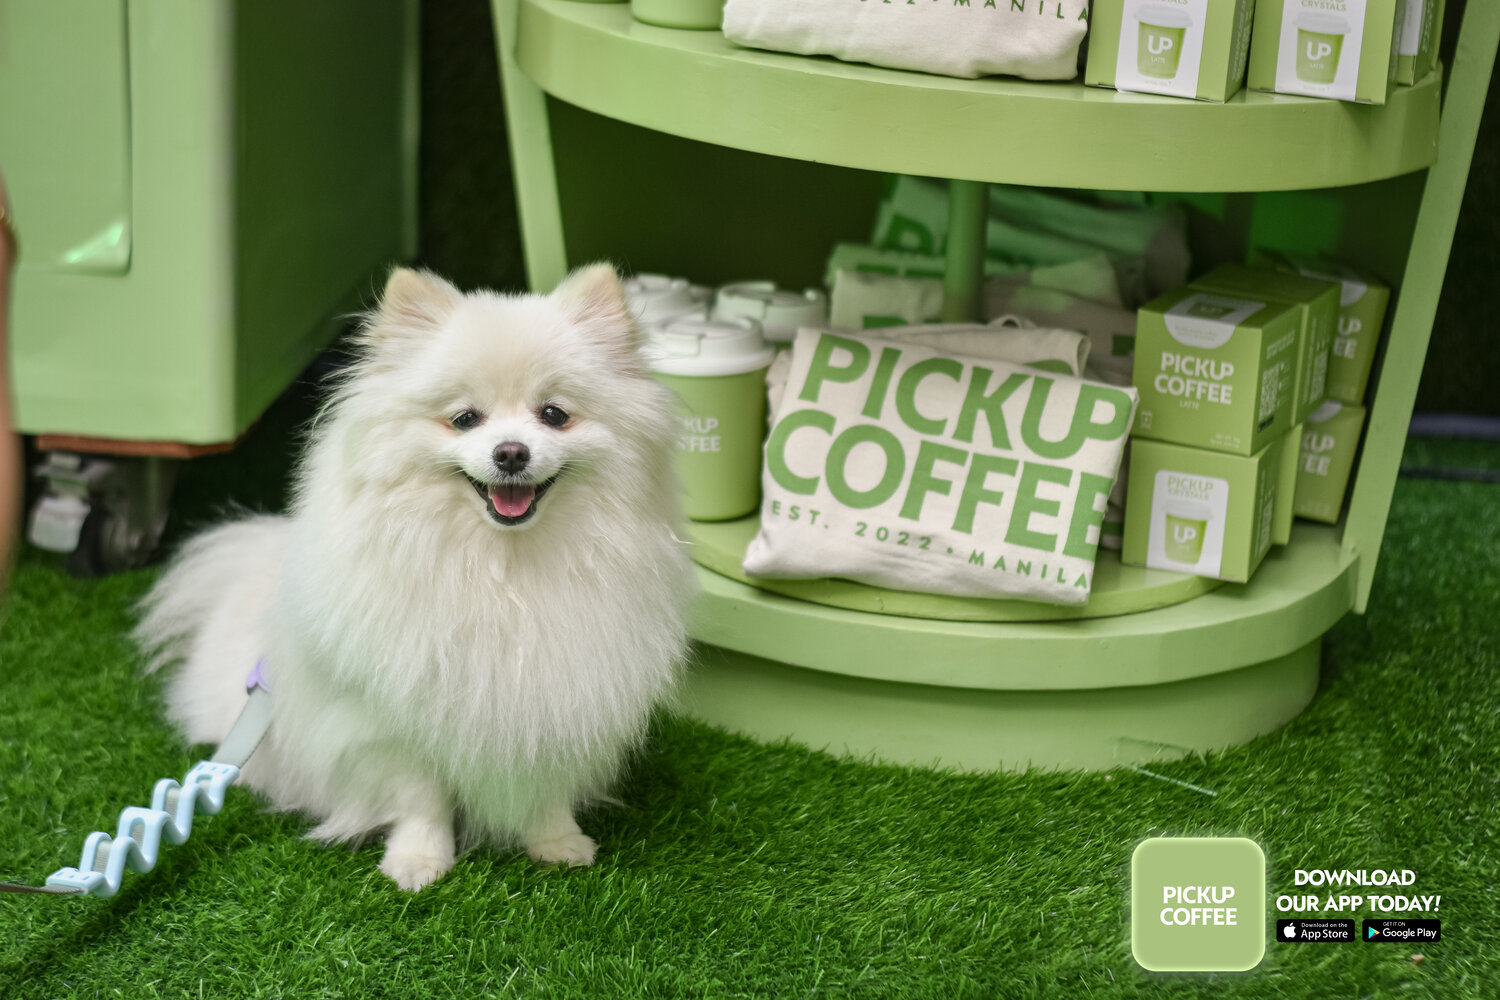 Your Go-To Pick Me Up: Pickup Coffee Launches New App With Kyle Echarri As Their Newest Ambassador